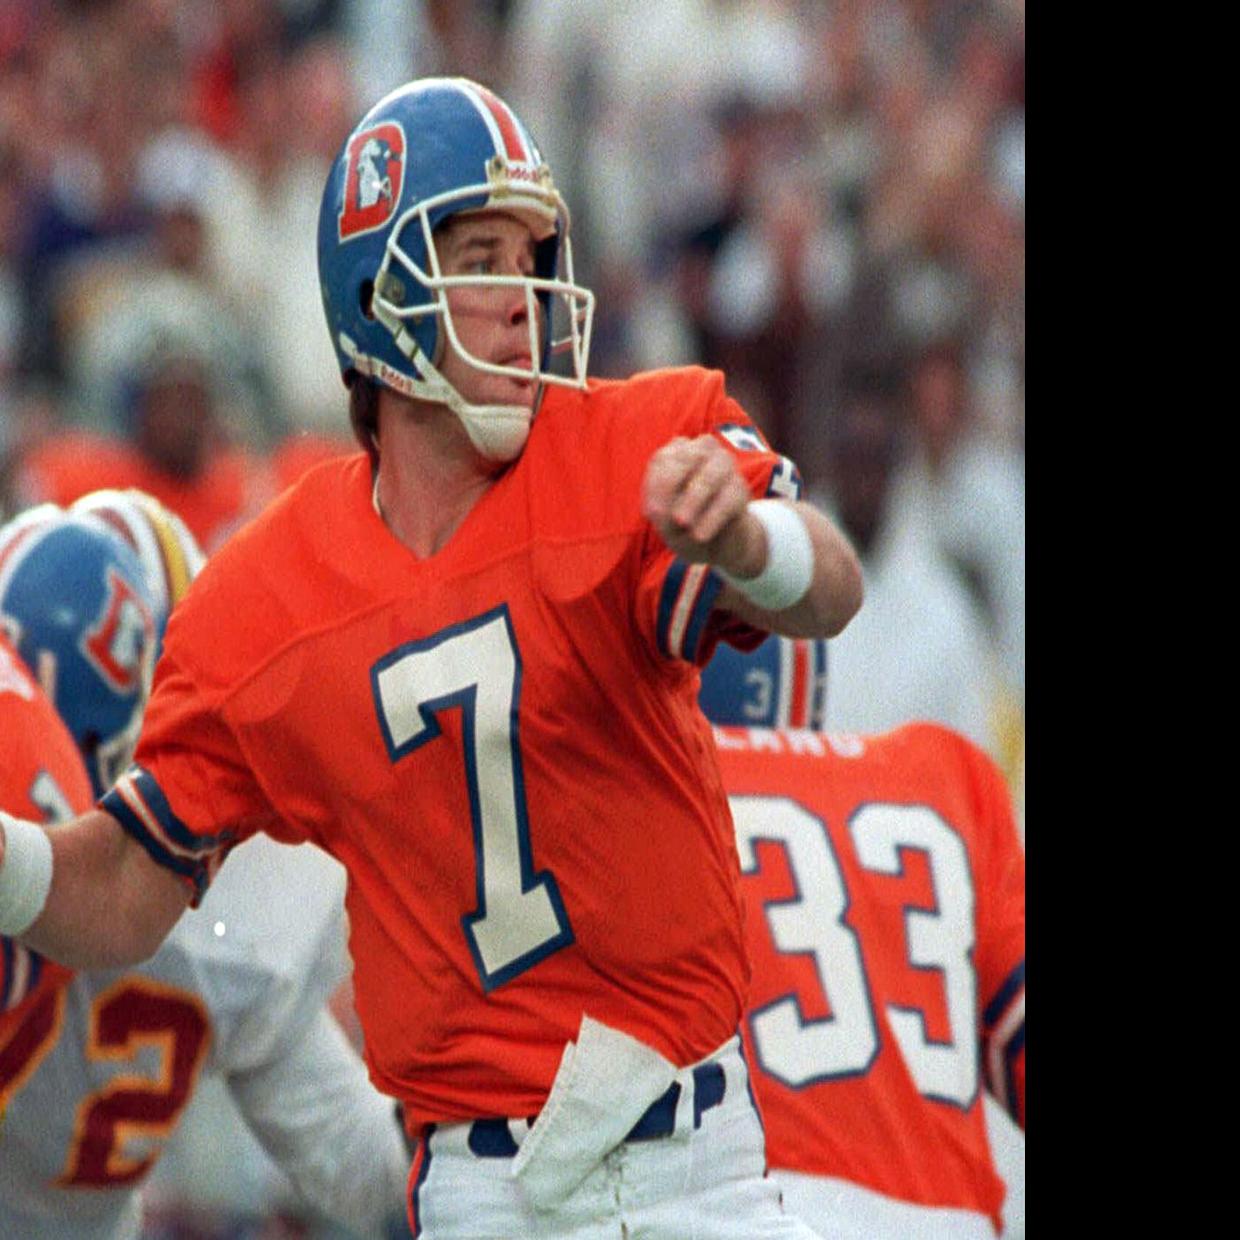 John Elway departs from Denver Broncos after year as consultant